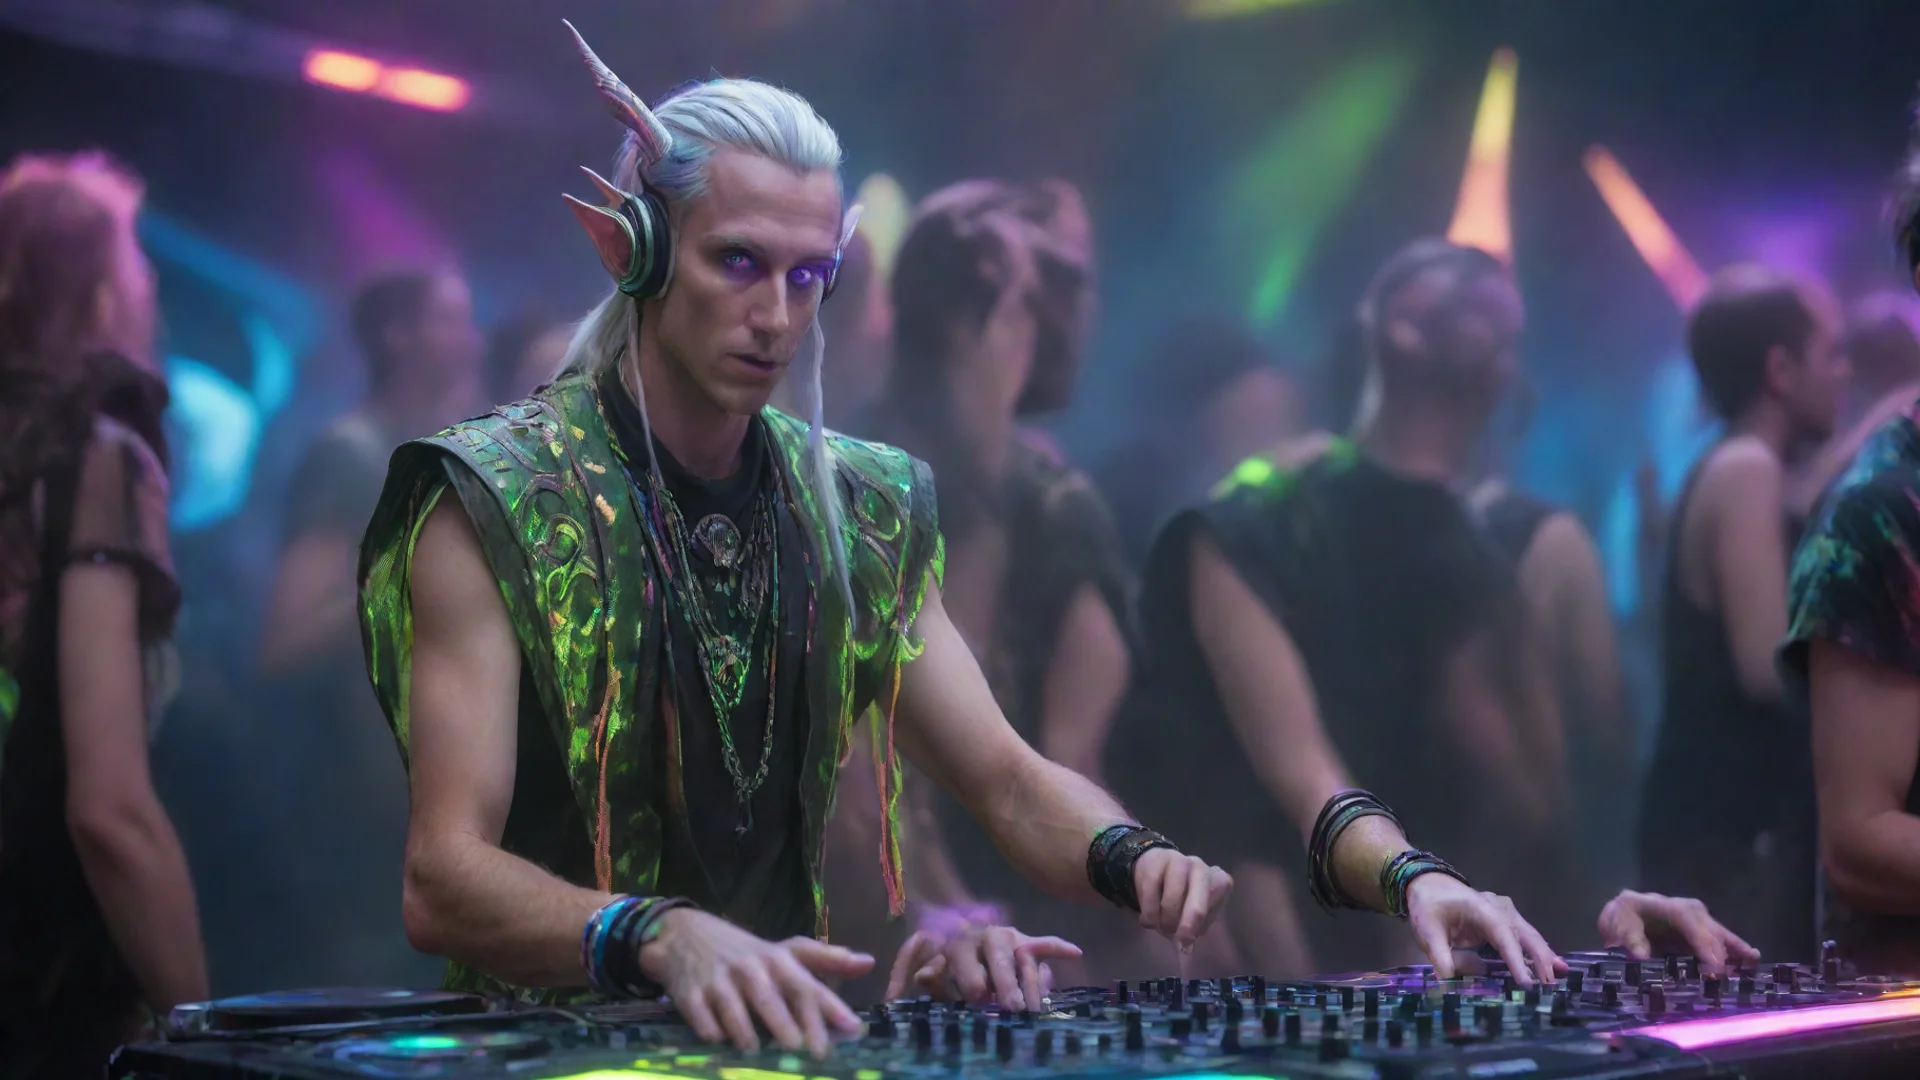 aihigh elf dj at a rave with lots of fluorescent elements wide